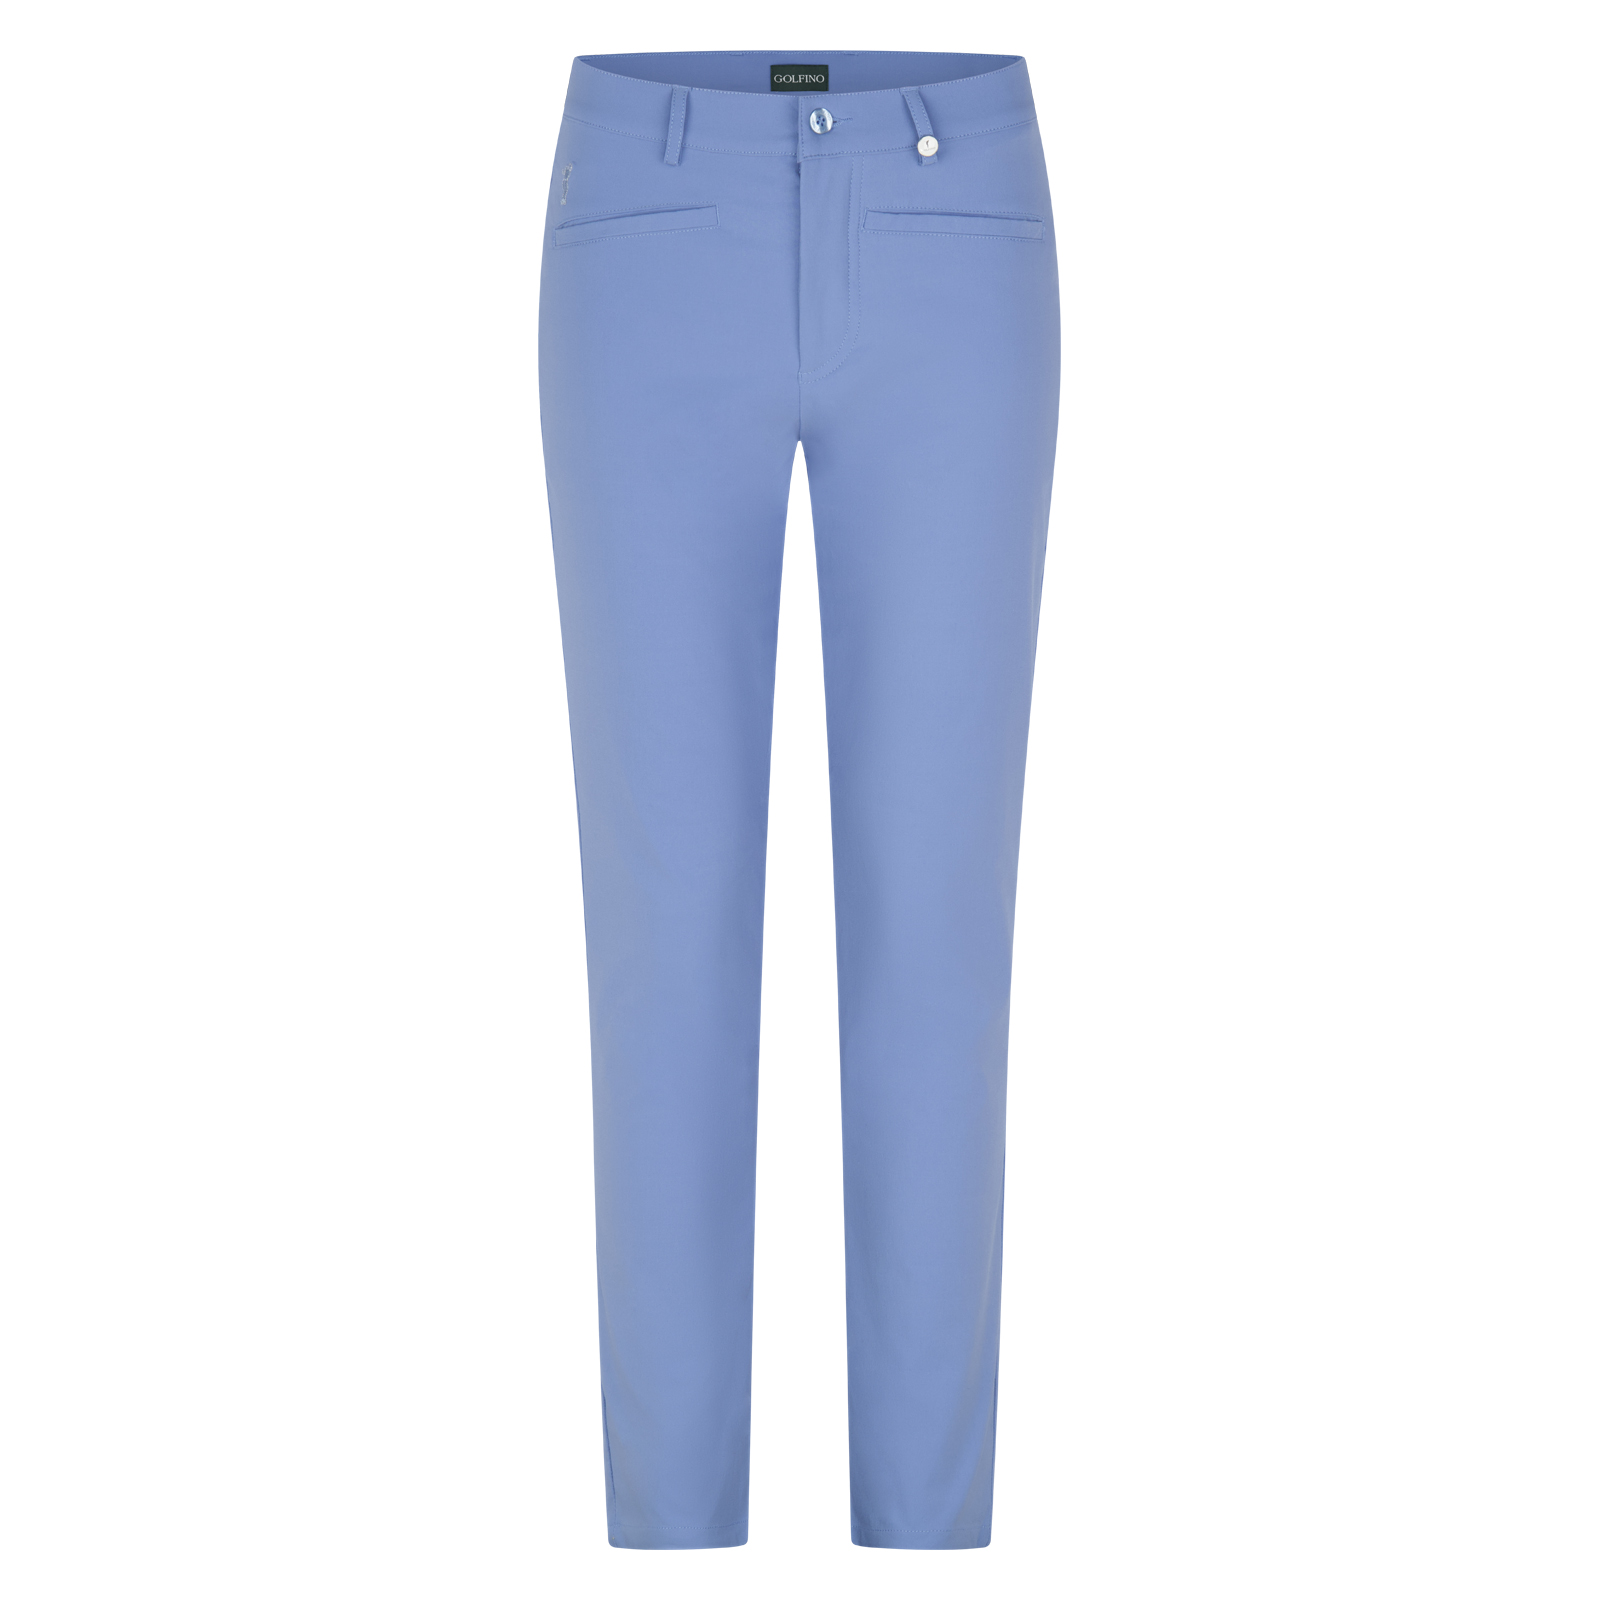 Sporty ladies' stretch 7/8 trousers